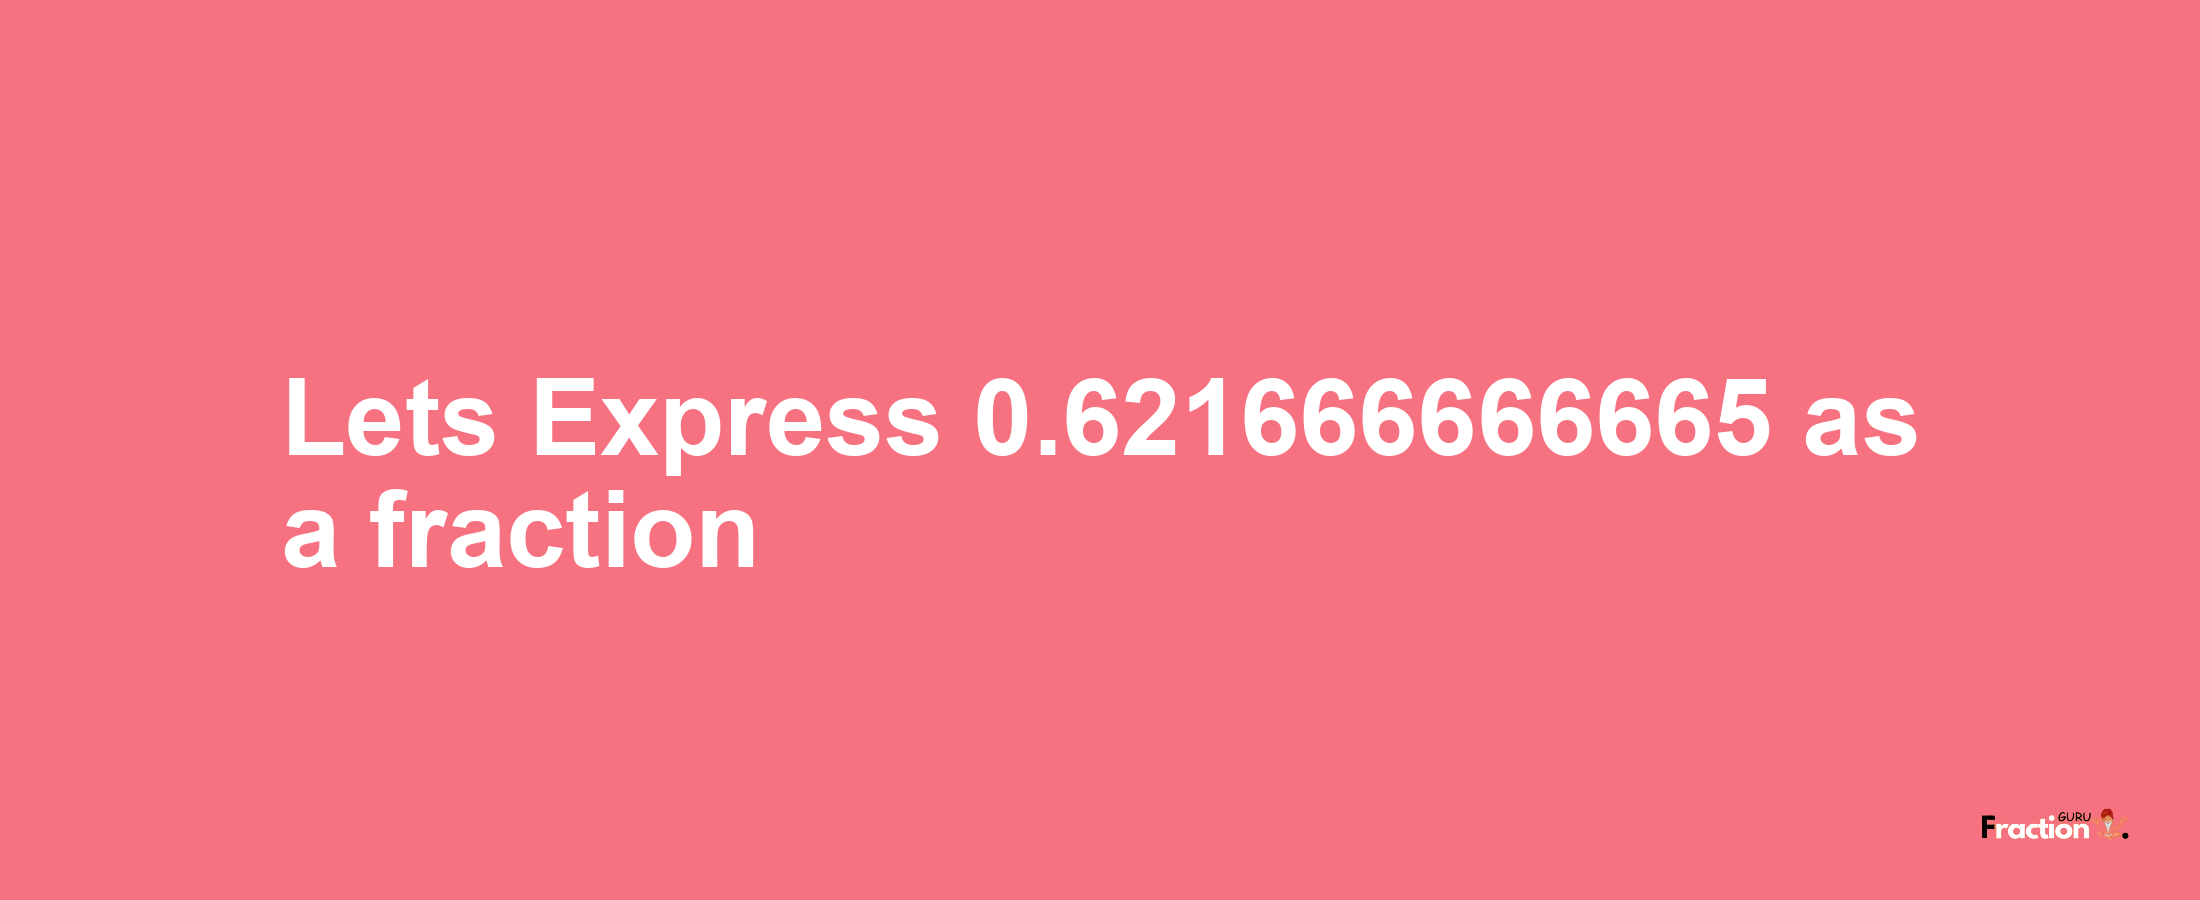 Lets Express 0.621666666665 as afraction